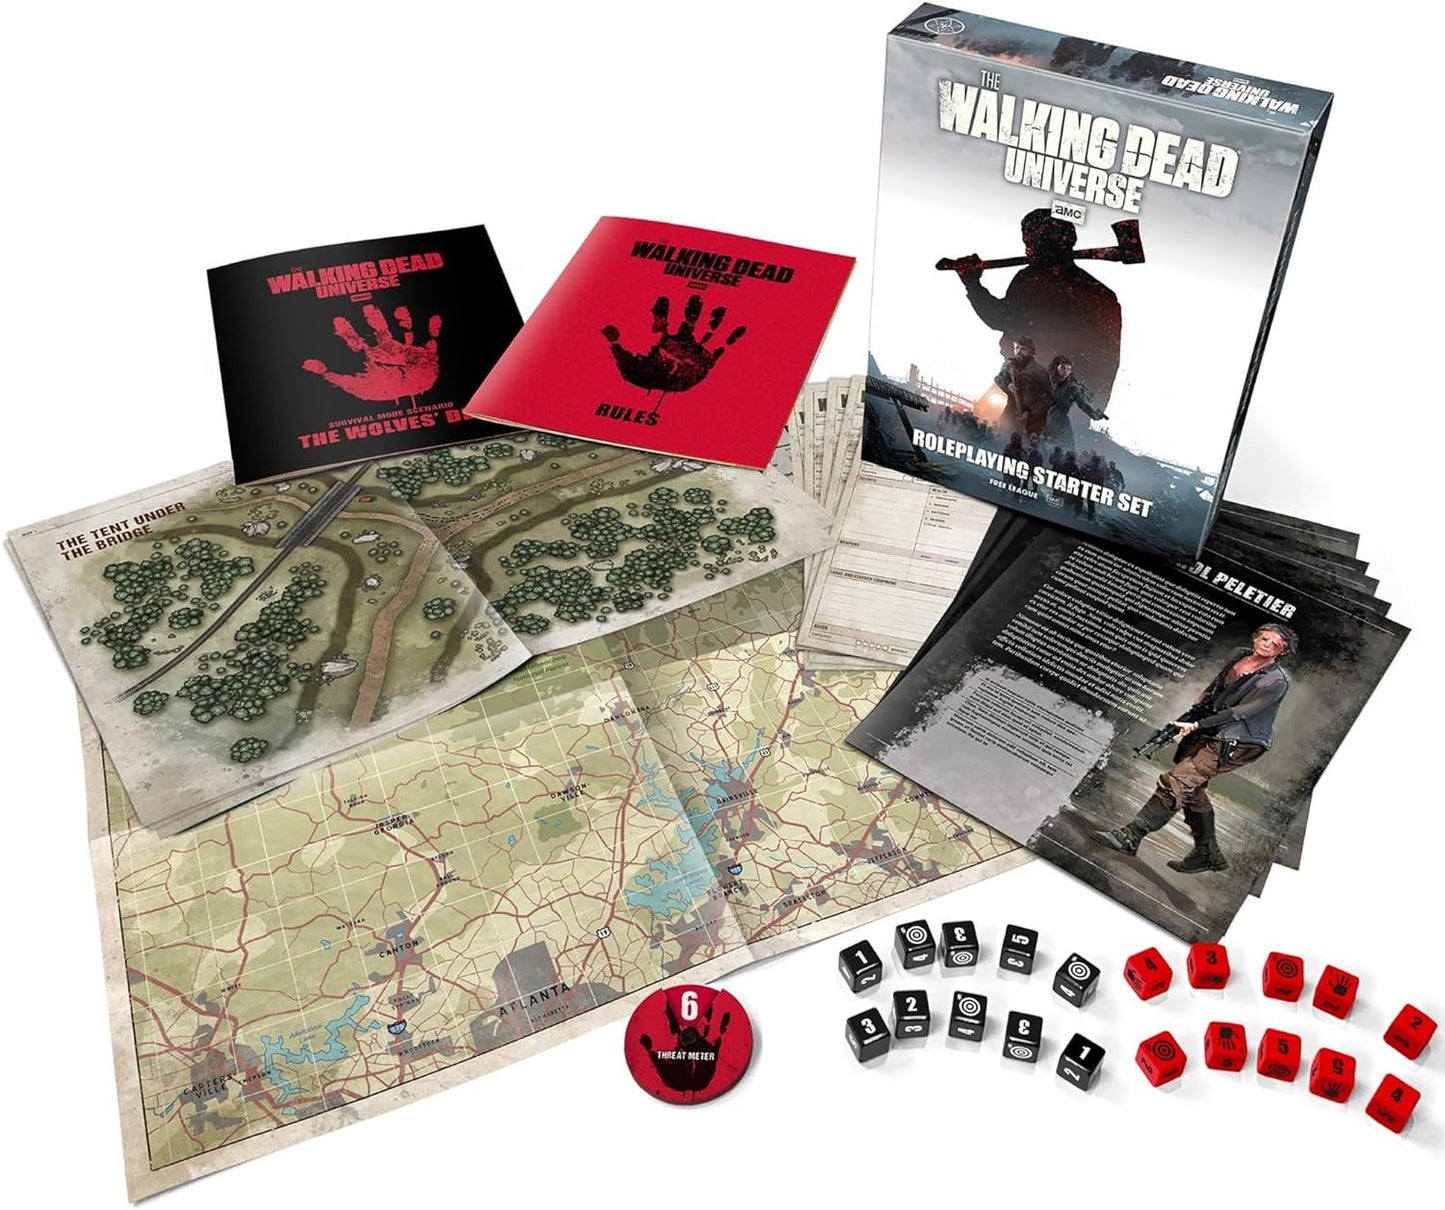 The Walking Dead Universe - Roleplaying Starter Set